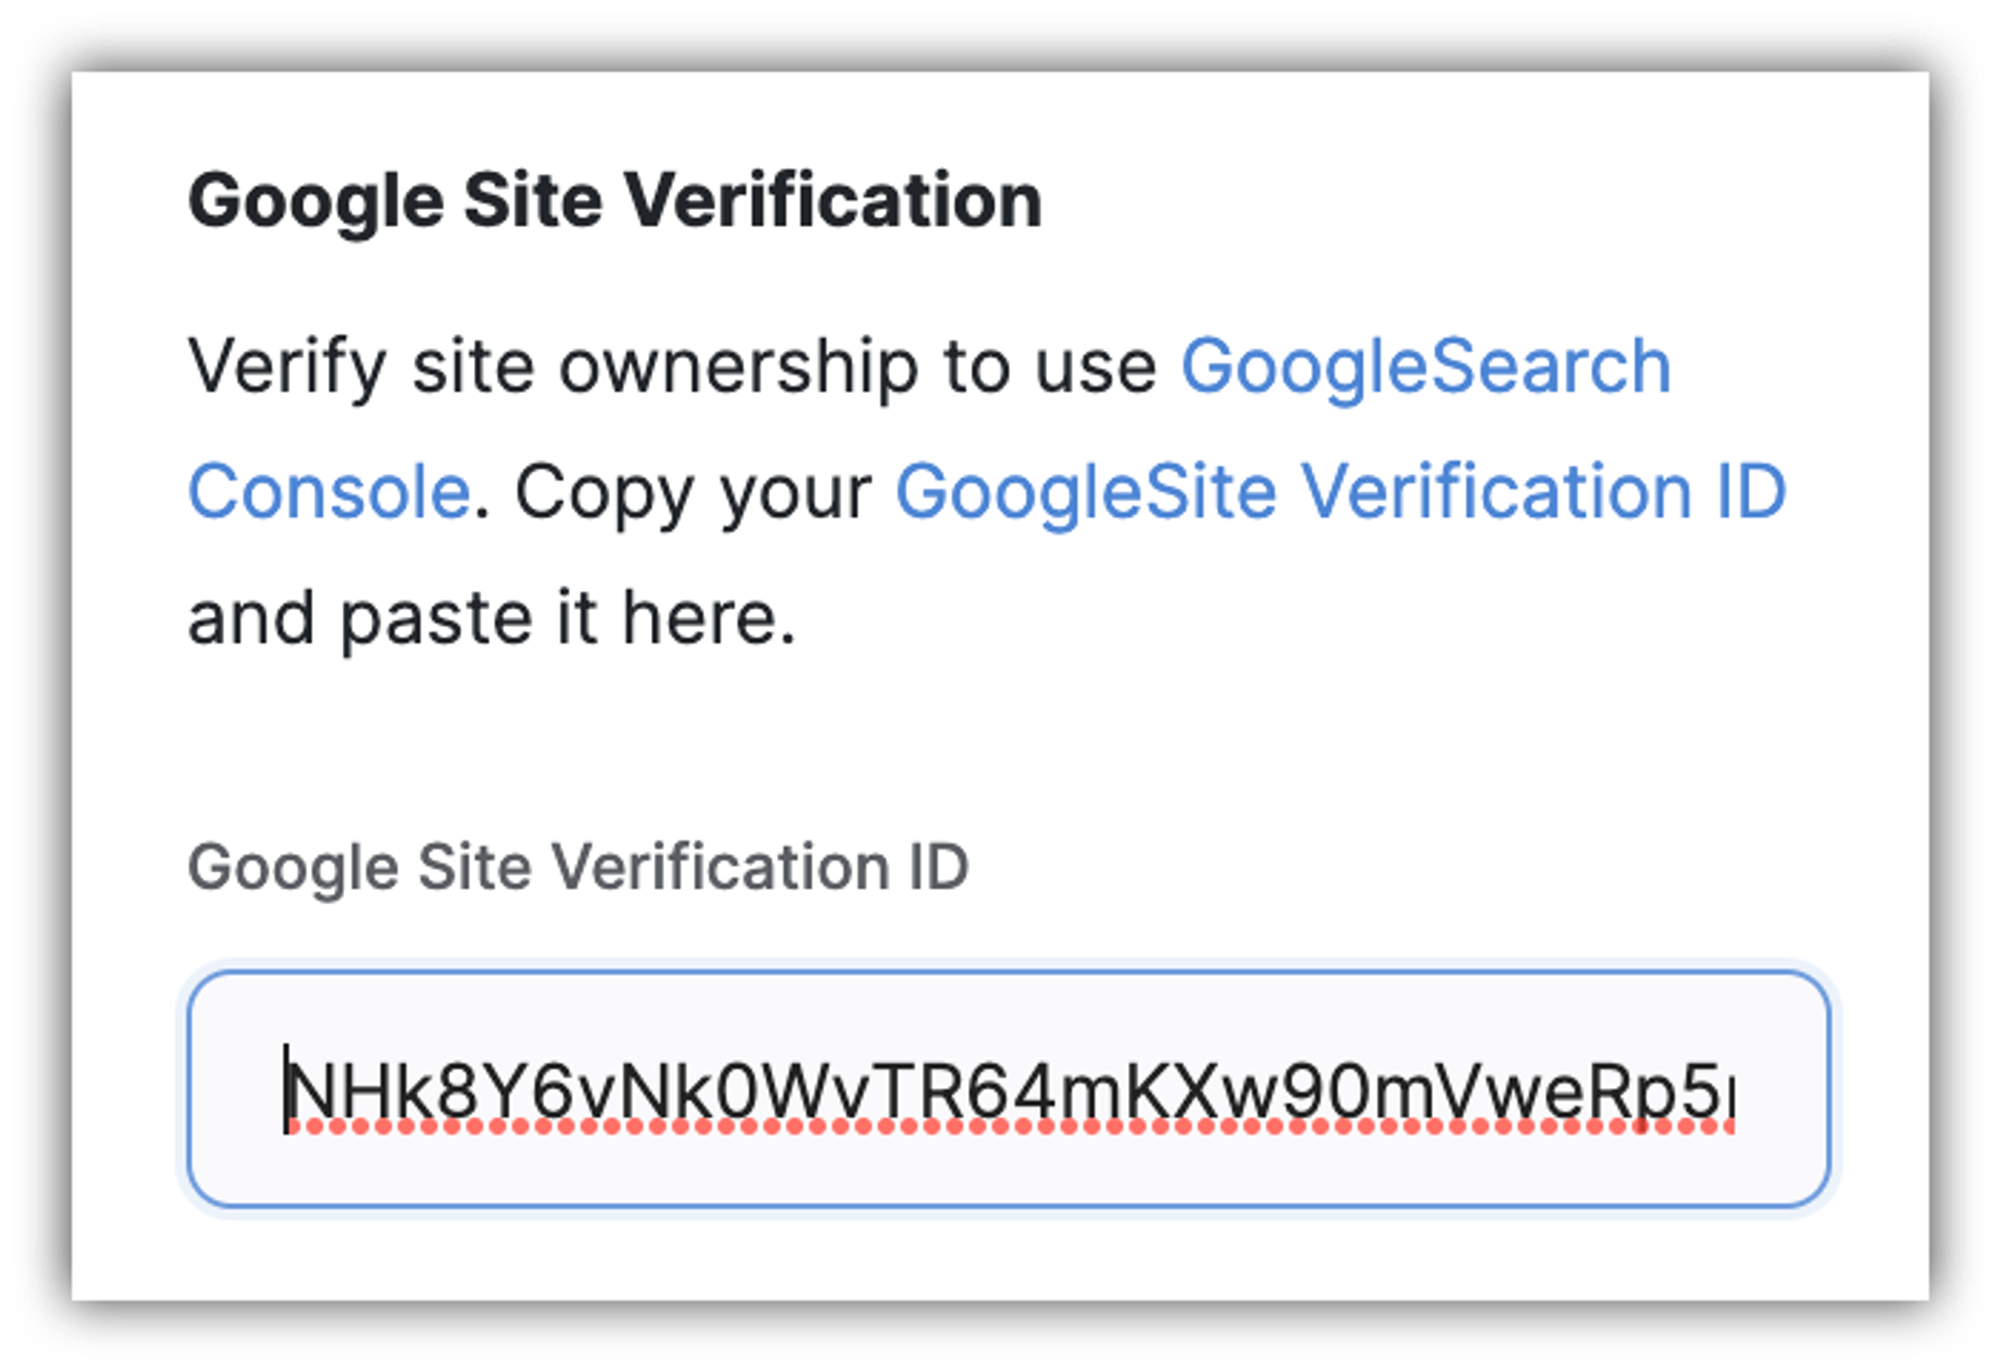 Pasting the verification ID